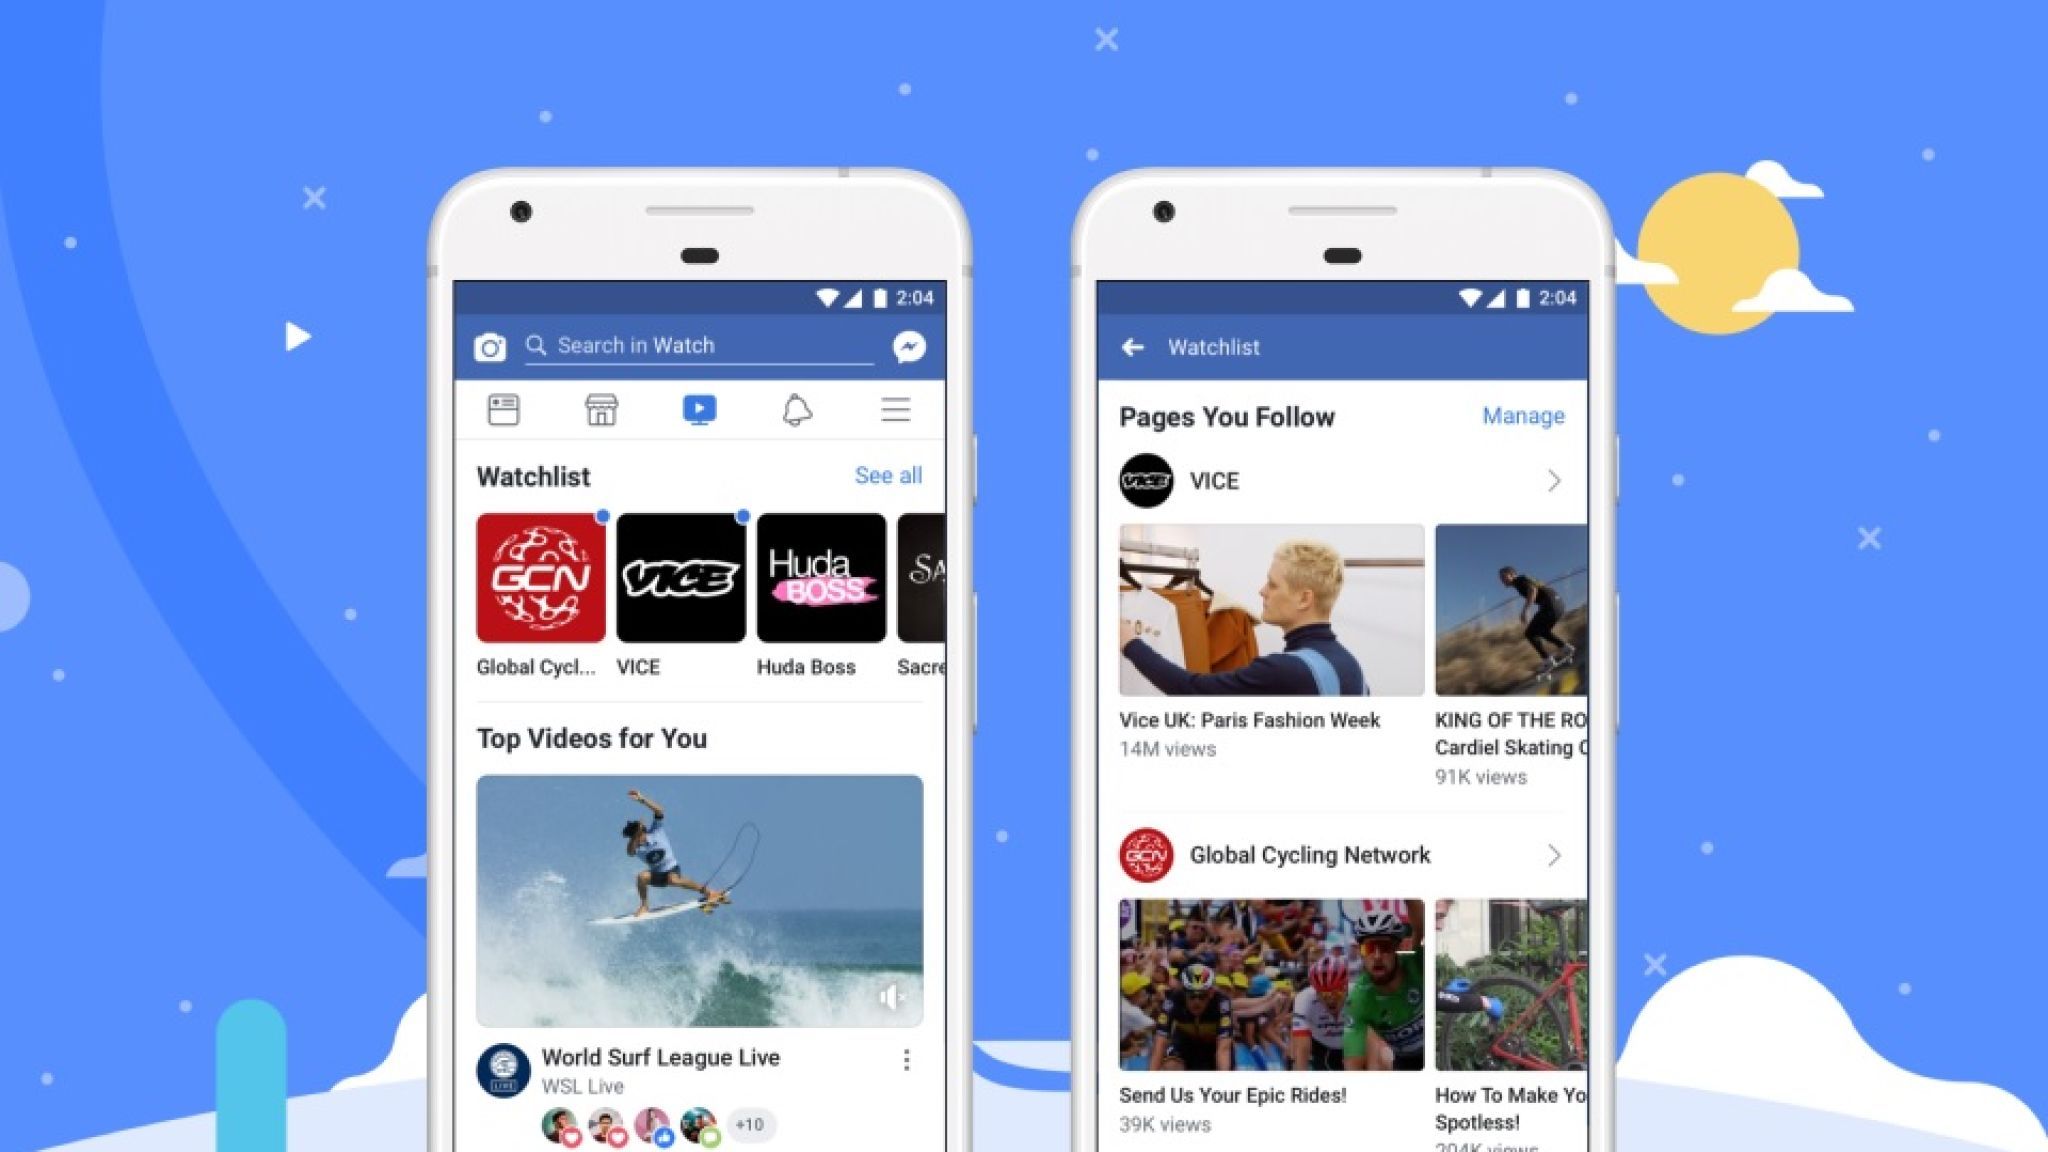 Facebook Watch Is Being Rolled Out Globally - Facebook Watch - HD Wallpaper 